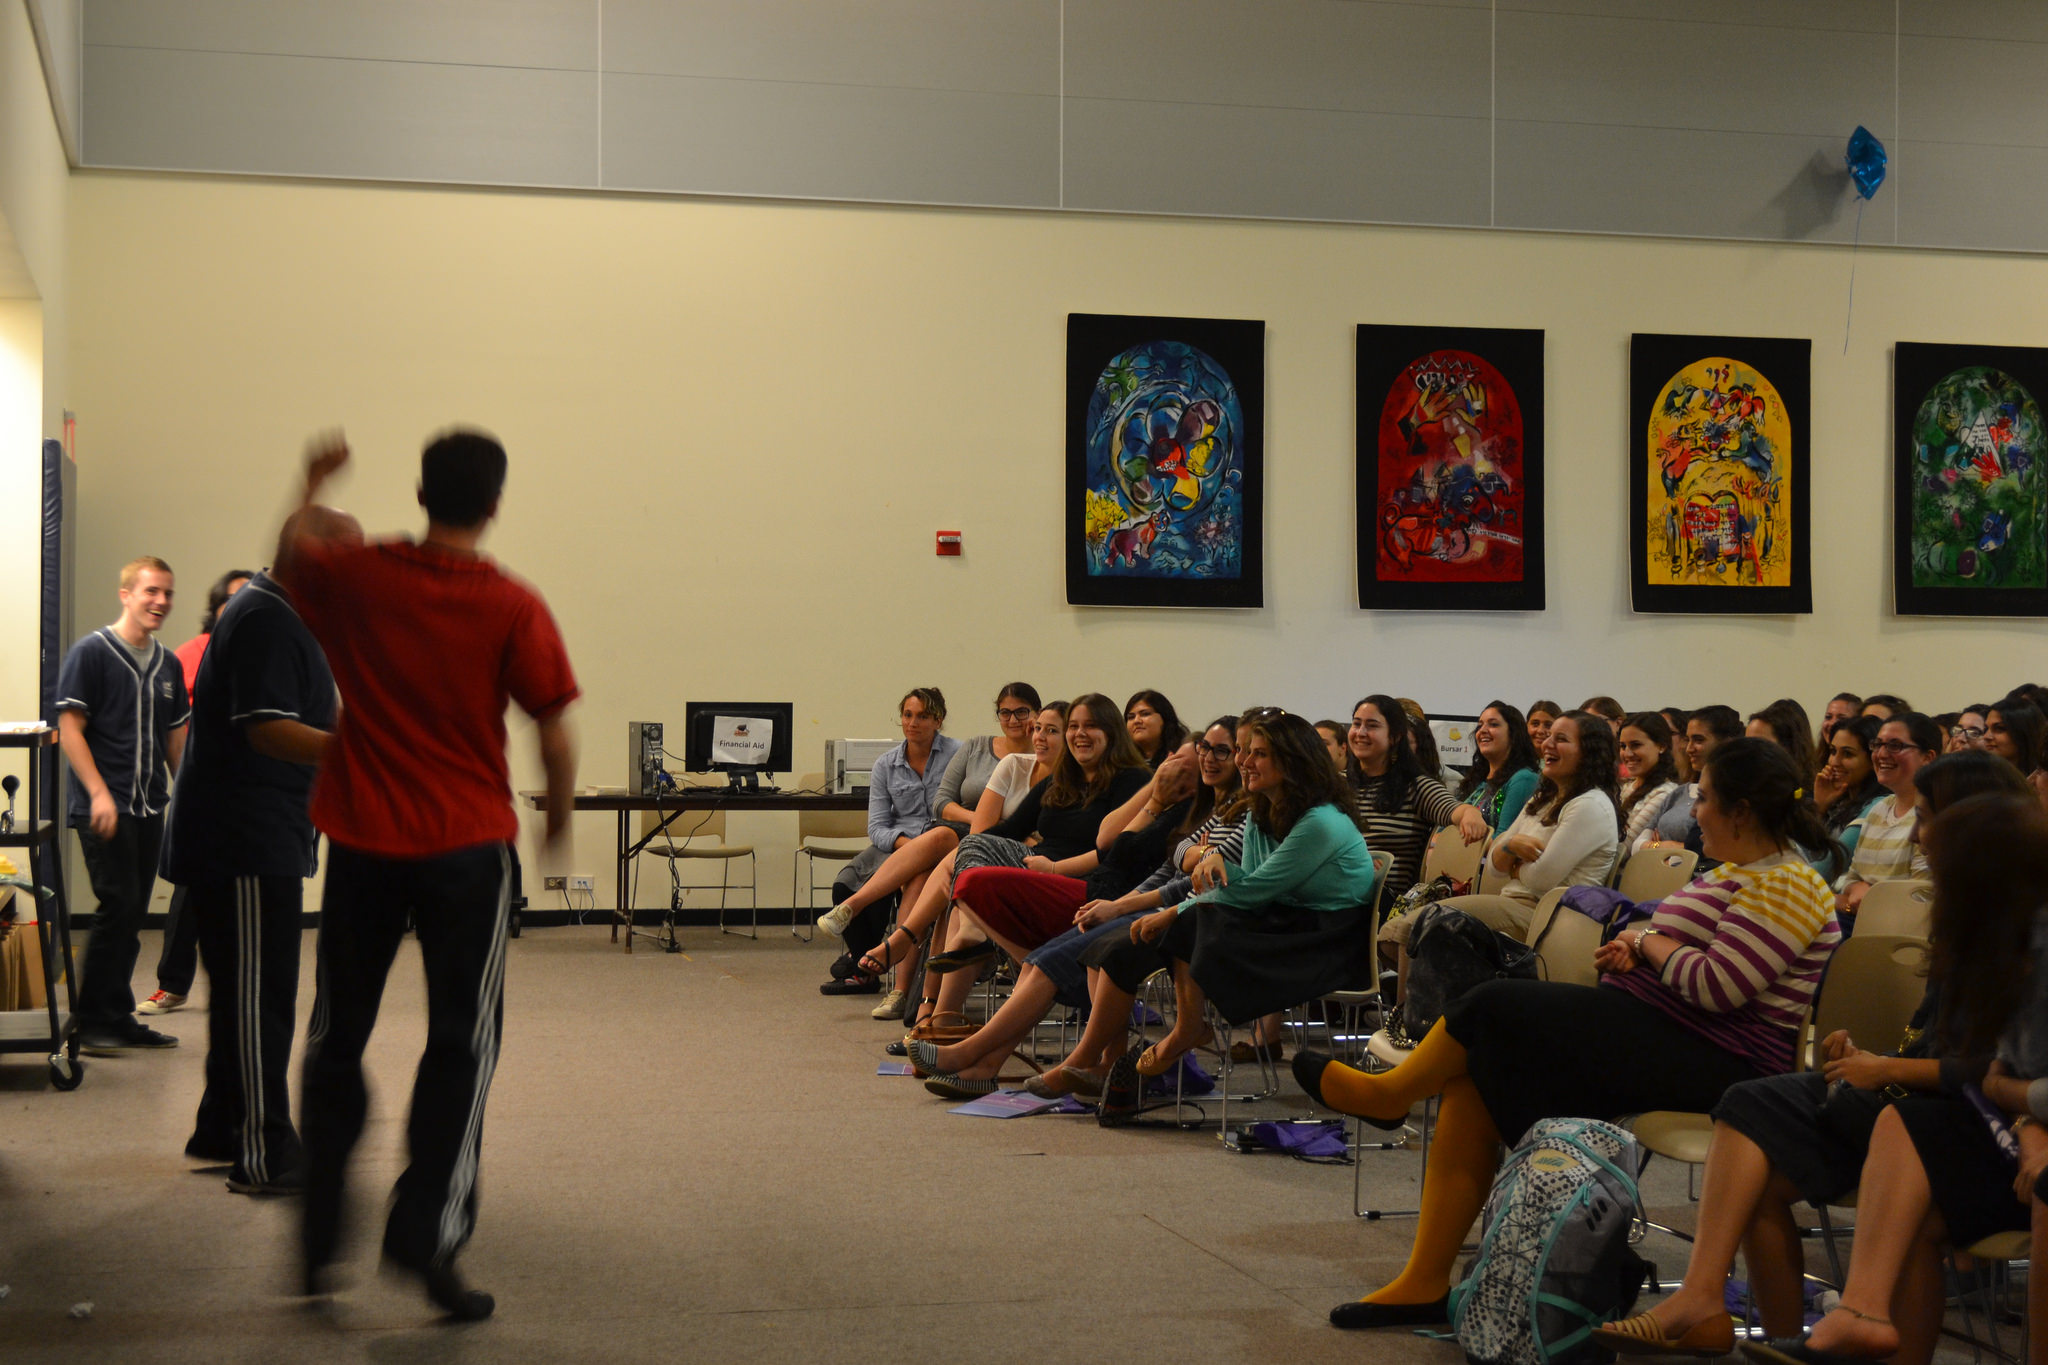 Orientation Week at LCW included an entertaining comedy show by the National Comedy Theater. 